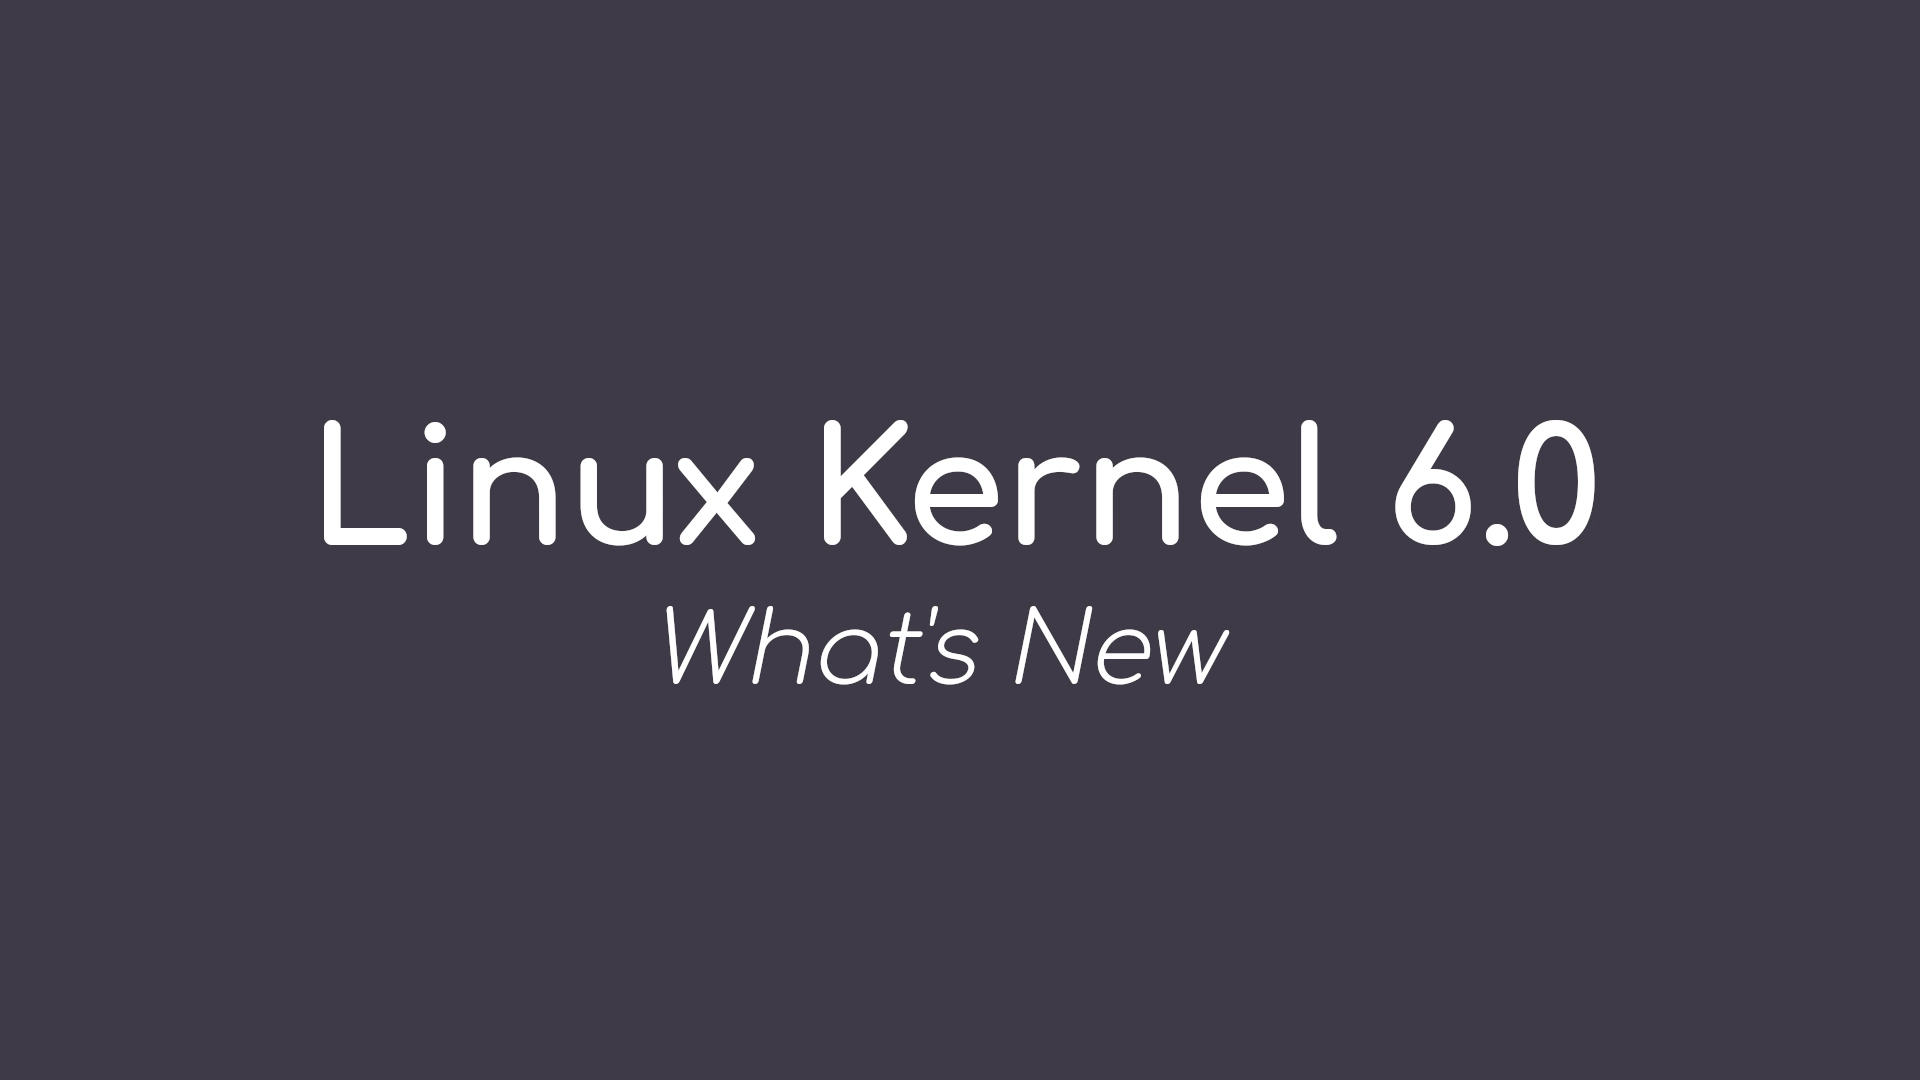 Linux Kernel 6.0 Officially Released, This Is What’s New